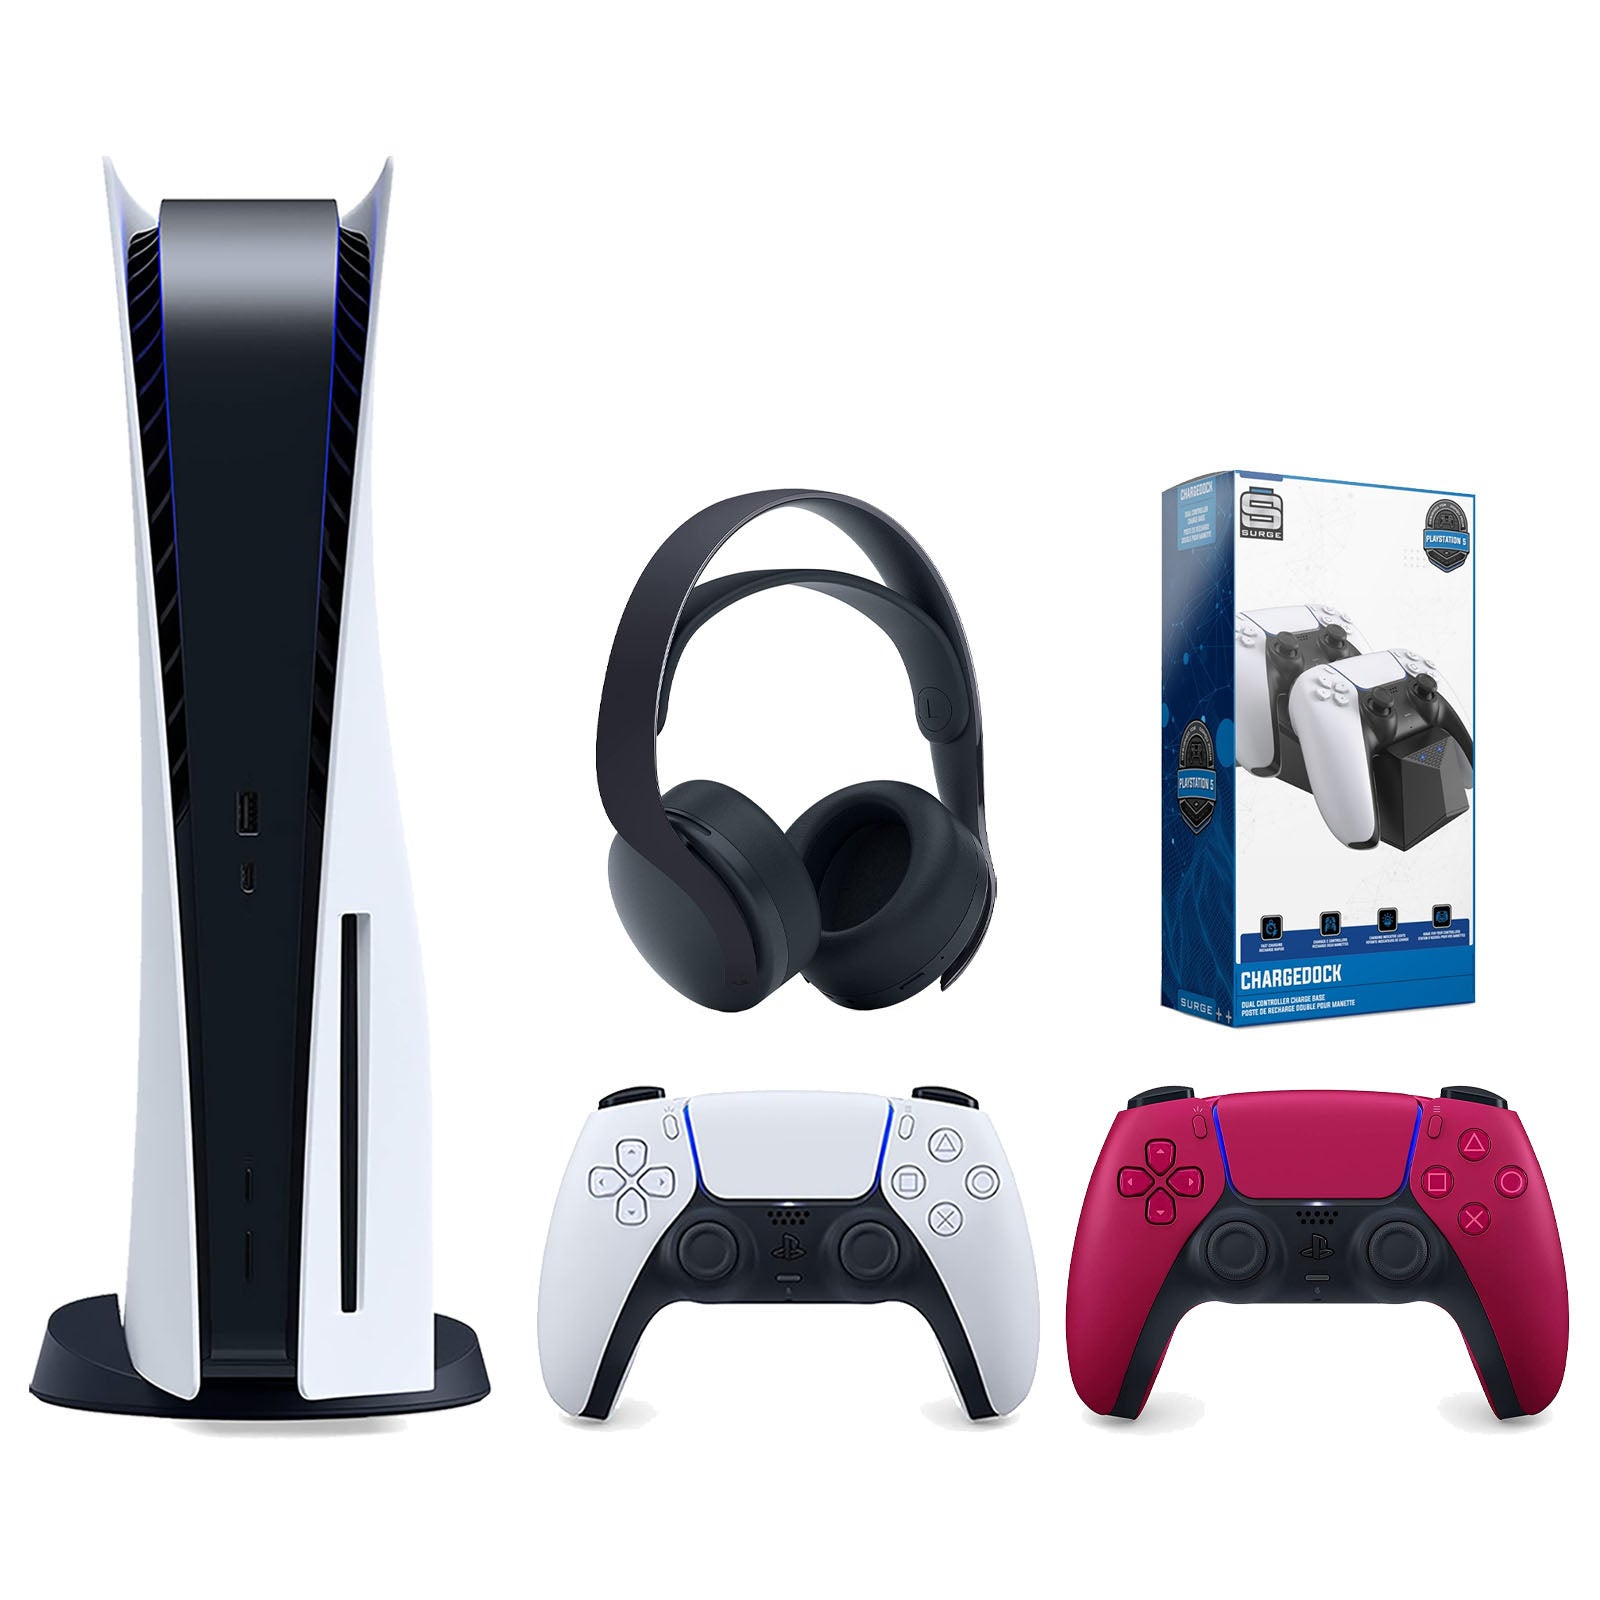 Sony Playstation 5 Disc Version Console with Extra Red Controller, Black PULSE 3D Headset and Surge Dual Controller Charge Dock Bundle - Pro-Distributing